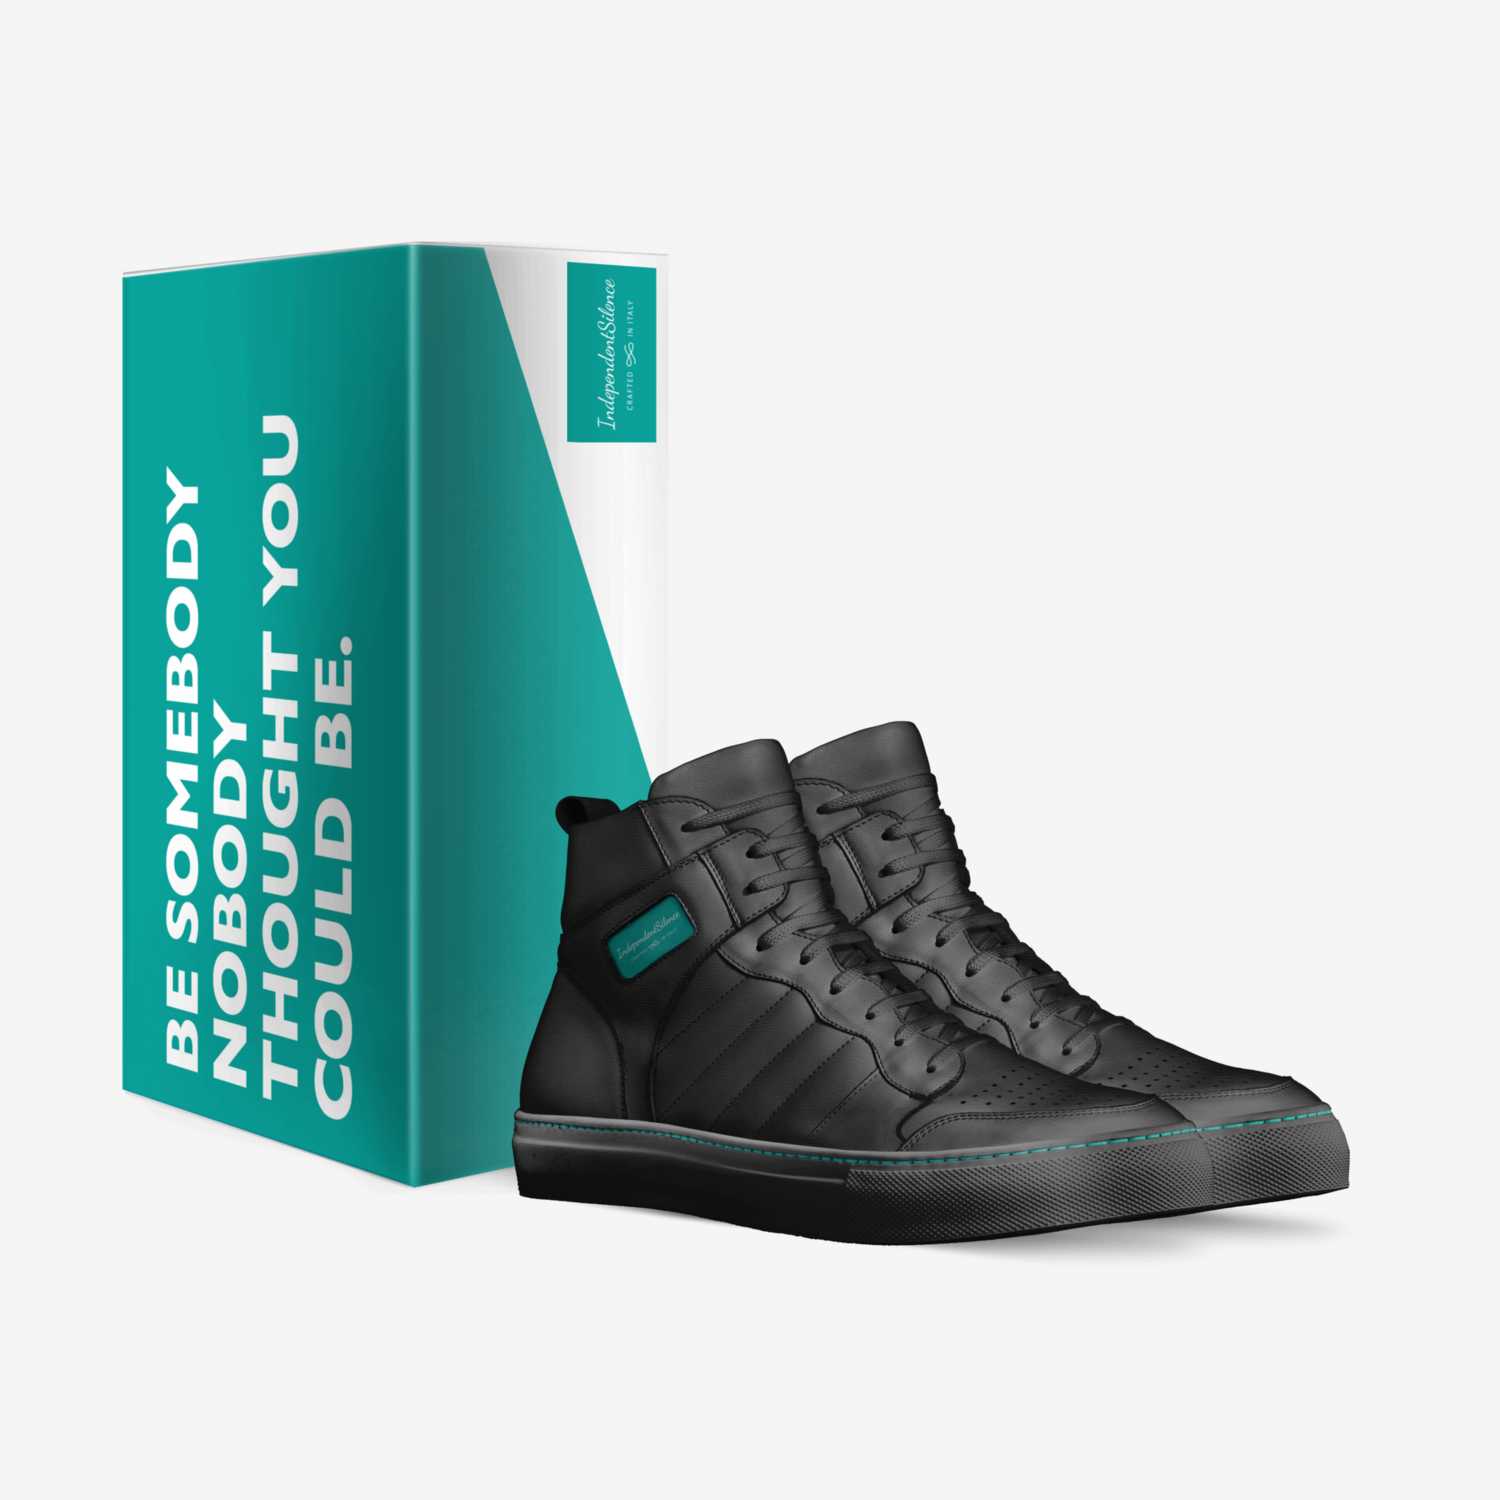 IndependentSilence custom made in Italy shoes by Dylan Allan | Box view